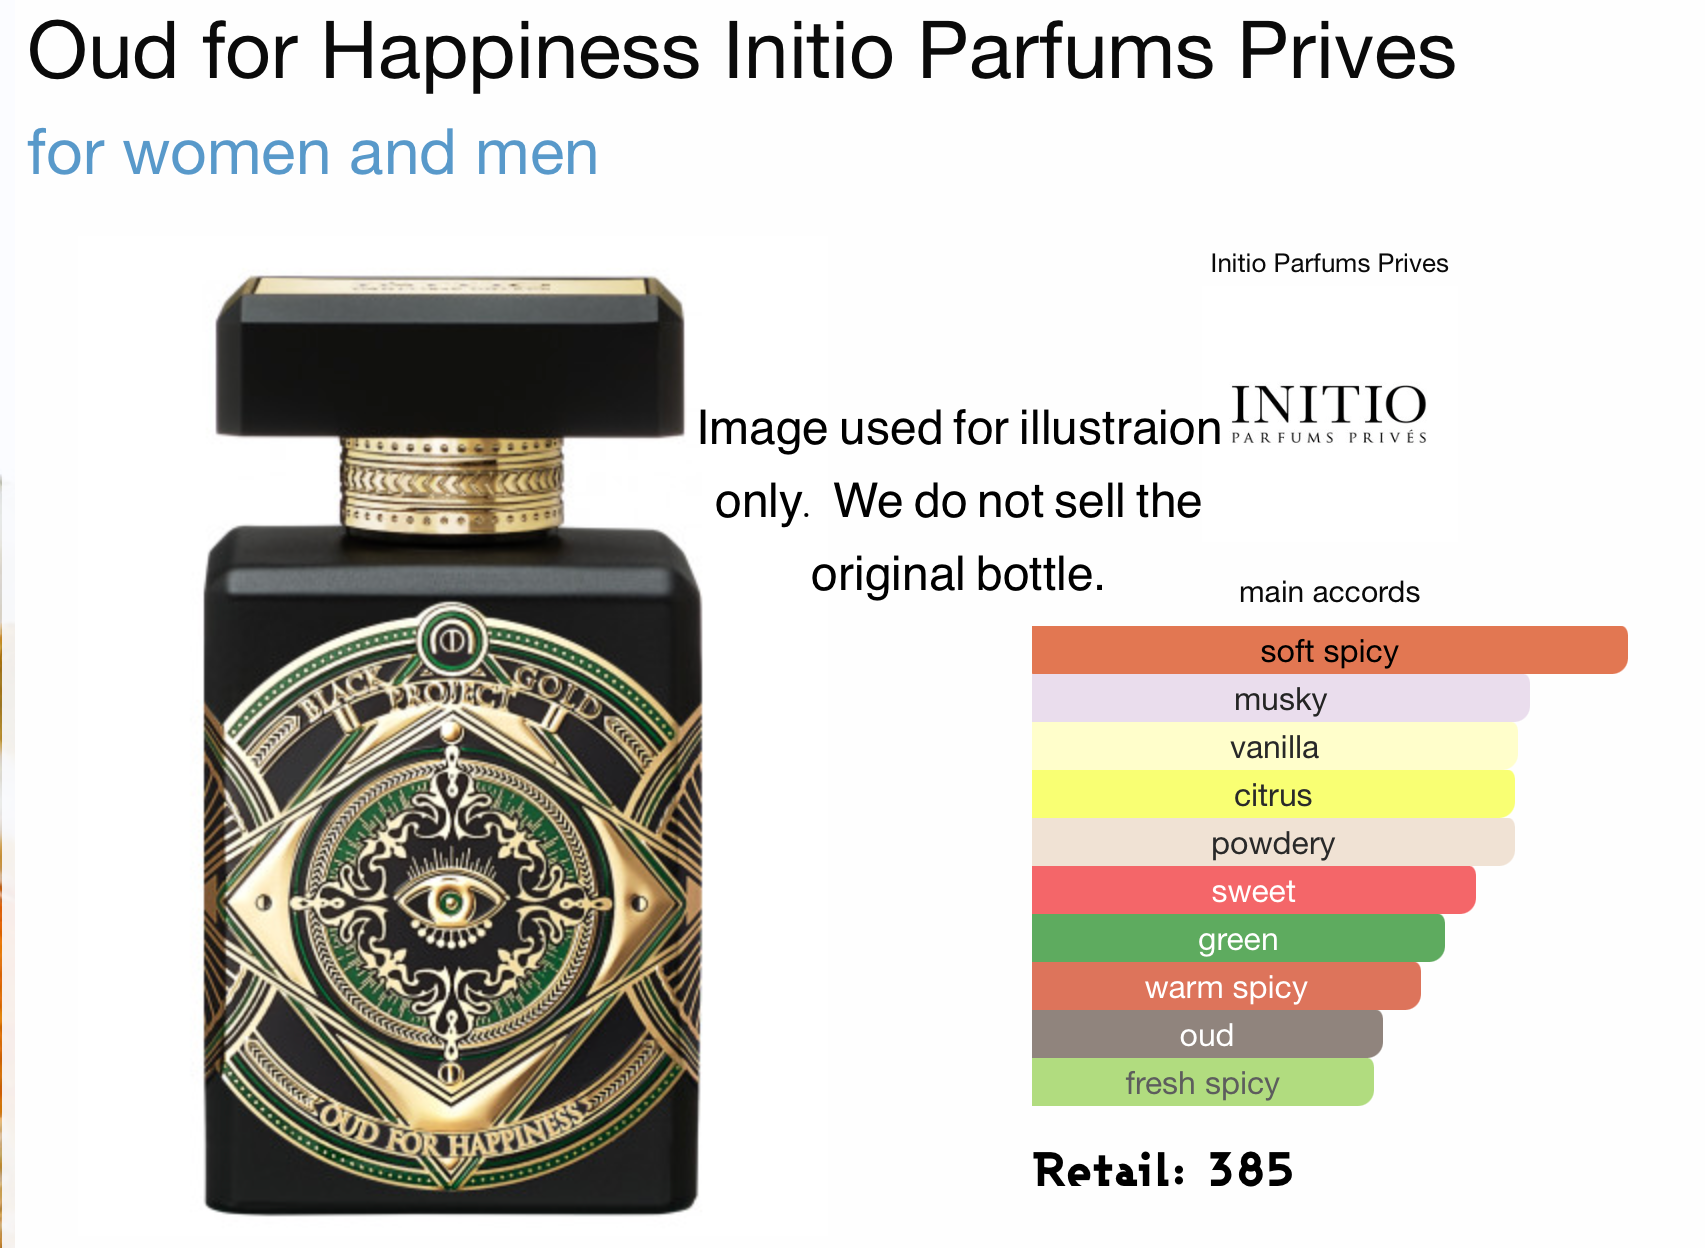 Compare Aroma To Oud For Happiness-2